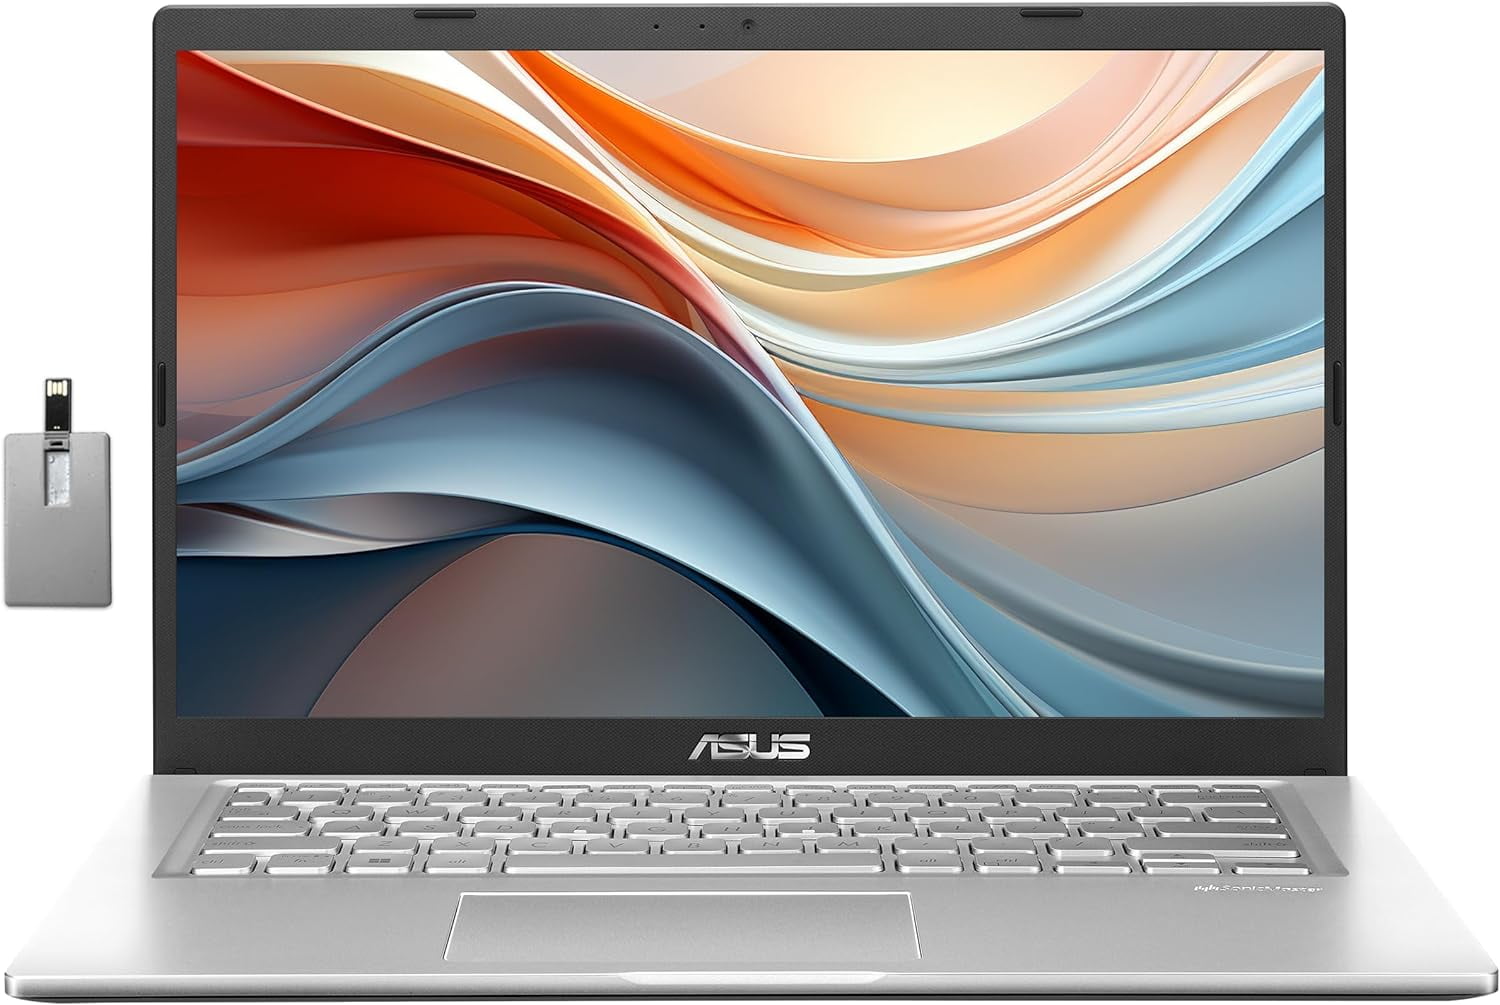 ASUS Vivobook 14 Laptop Intel Core i3-1115G4 with 8GB Memory